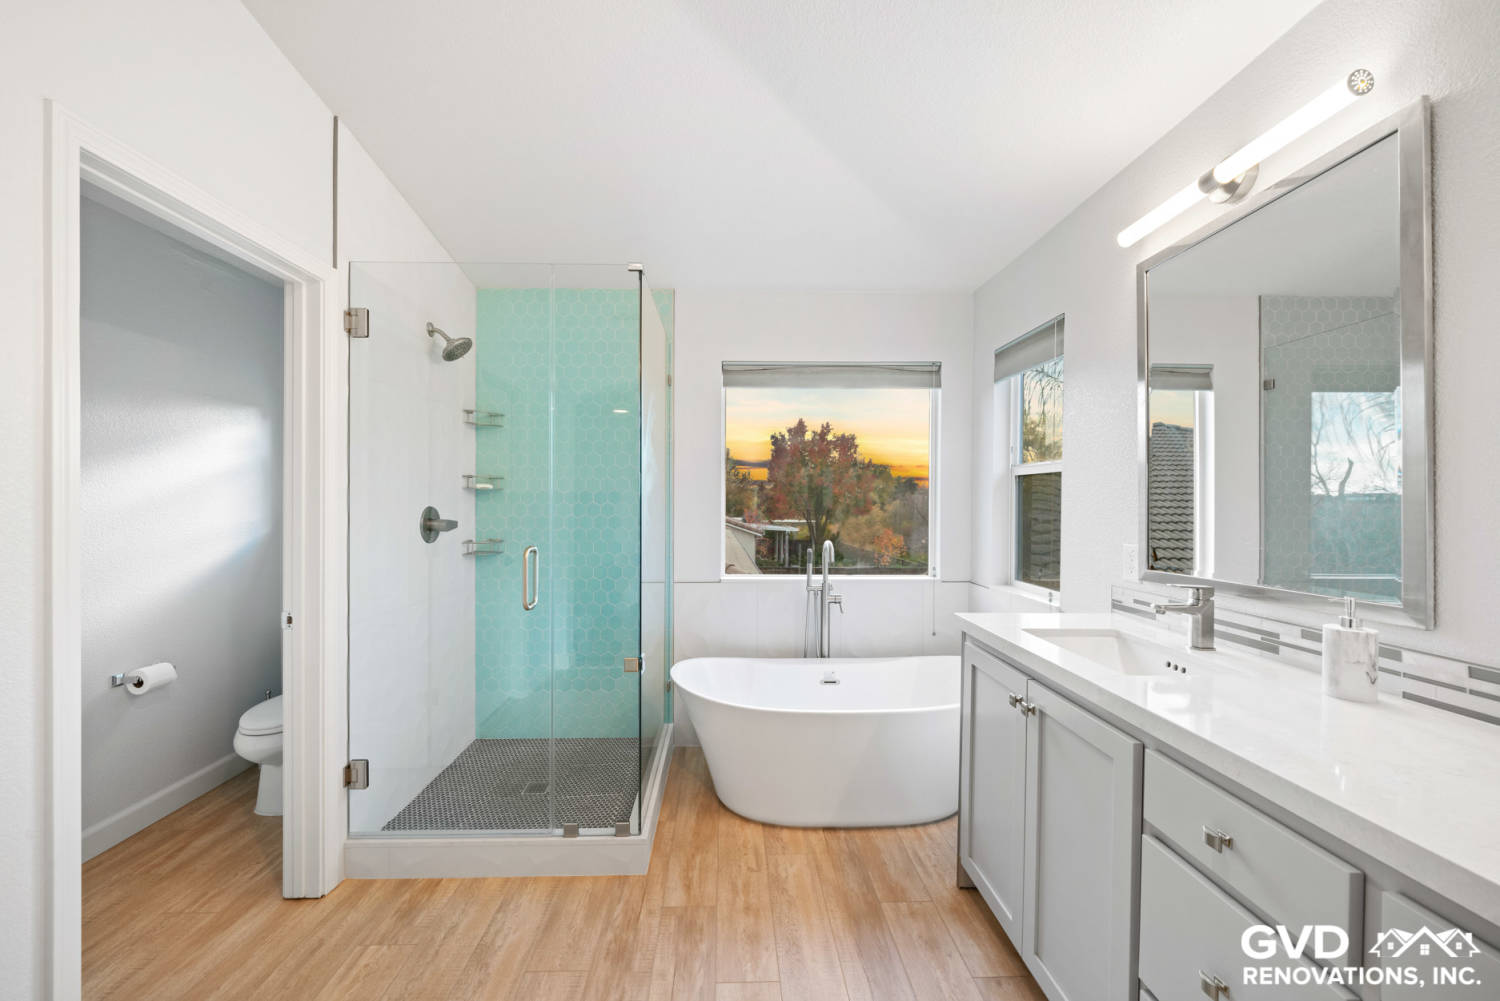 How Much Is The Average Cost Of A Bathroom Remodel - How Much Should A Bathroom Renovation Cost